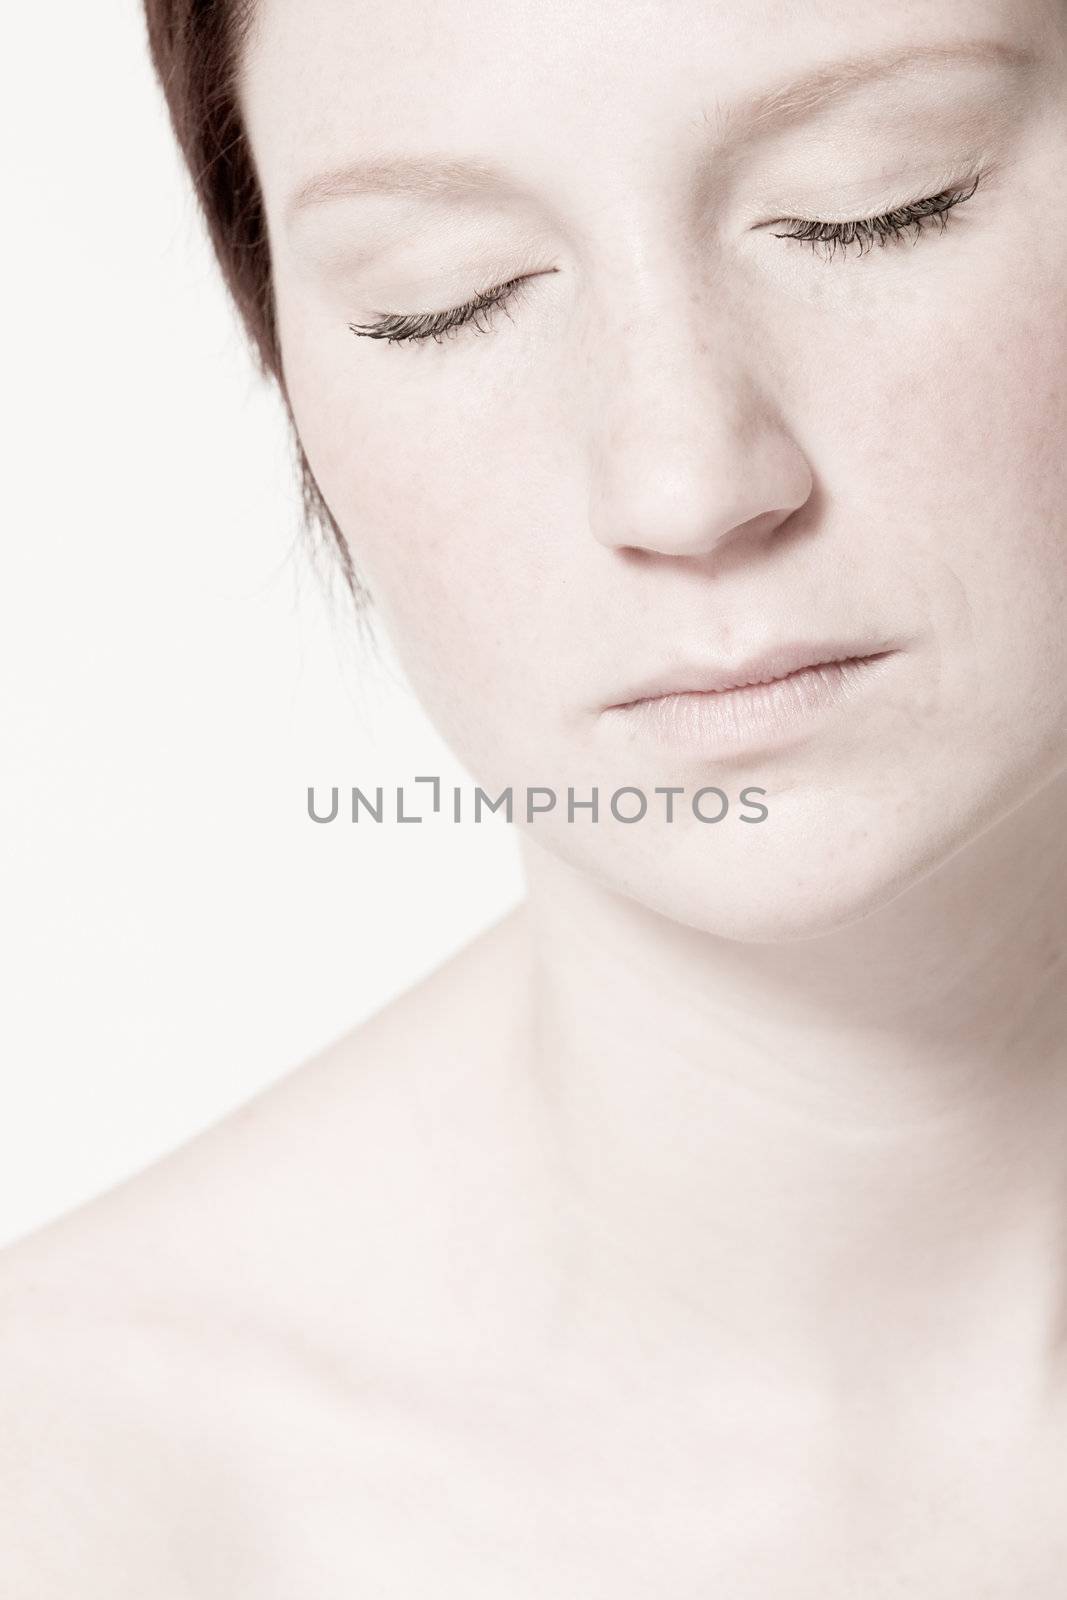 Studio portrait of a young woman with short hair looking relaxed